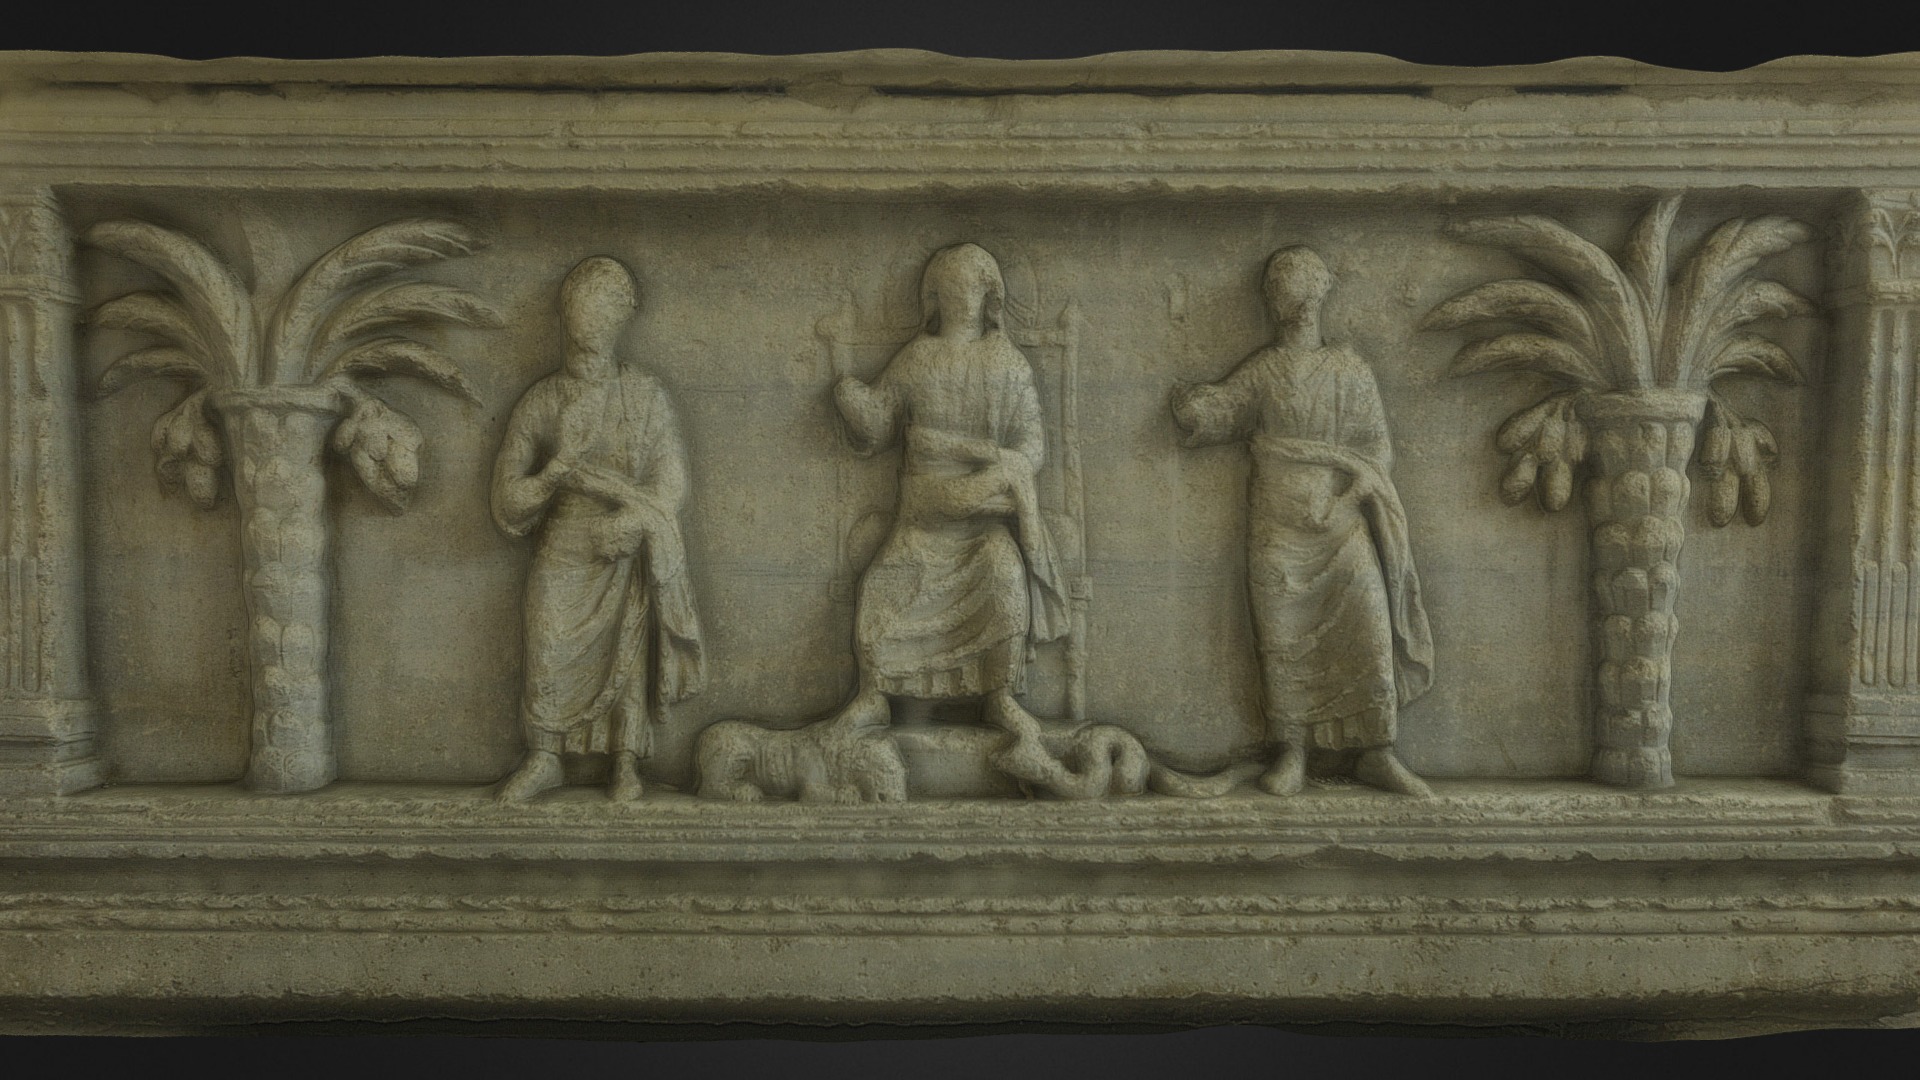 3D model 2017 Ravenna – Fregio di Sarcofago - This is a 3D model of the 2017 Ravenna - Fregio di Sarcofago. The 3D model is about a stone carving of a group of people.